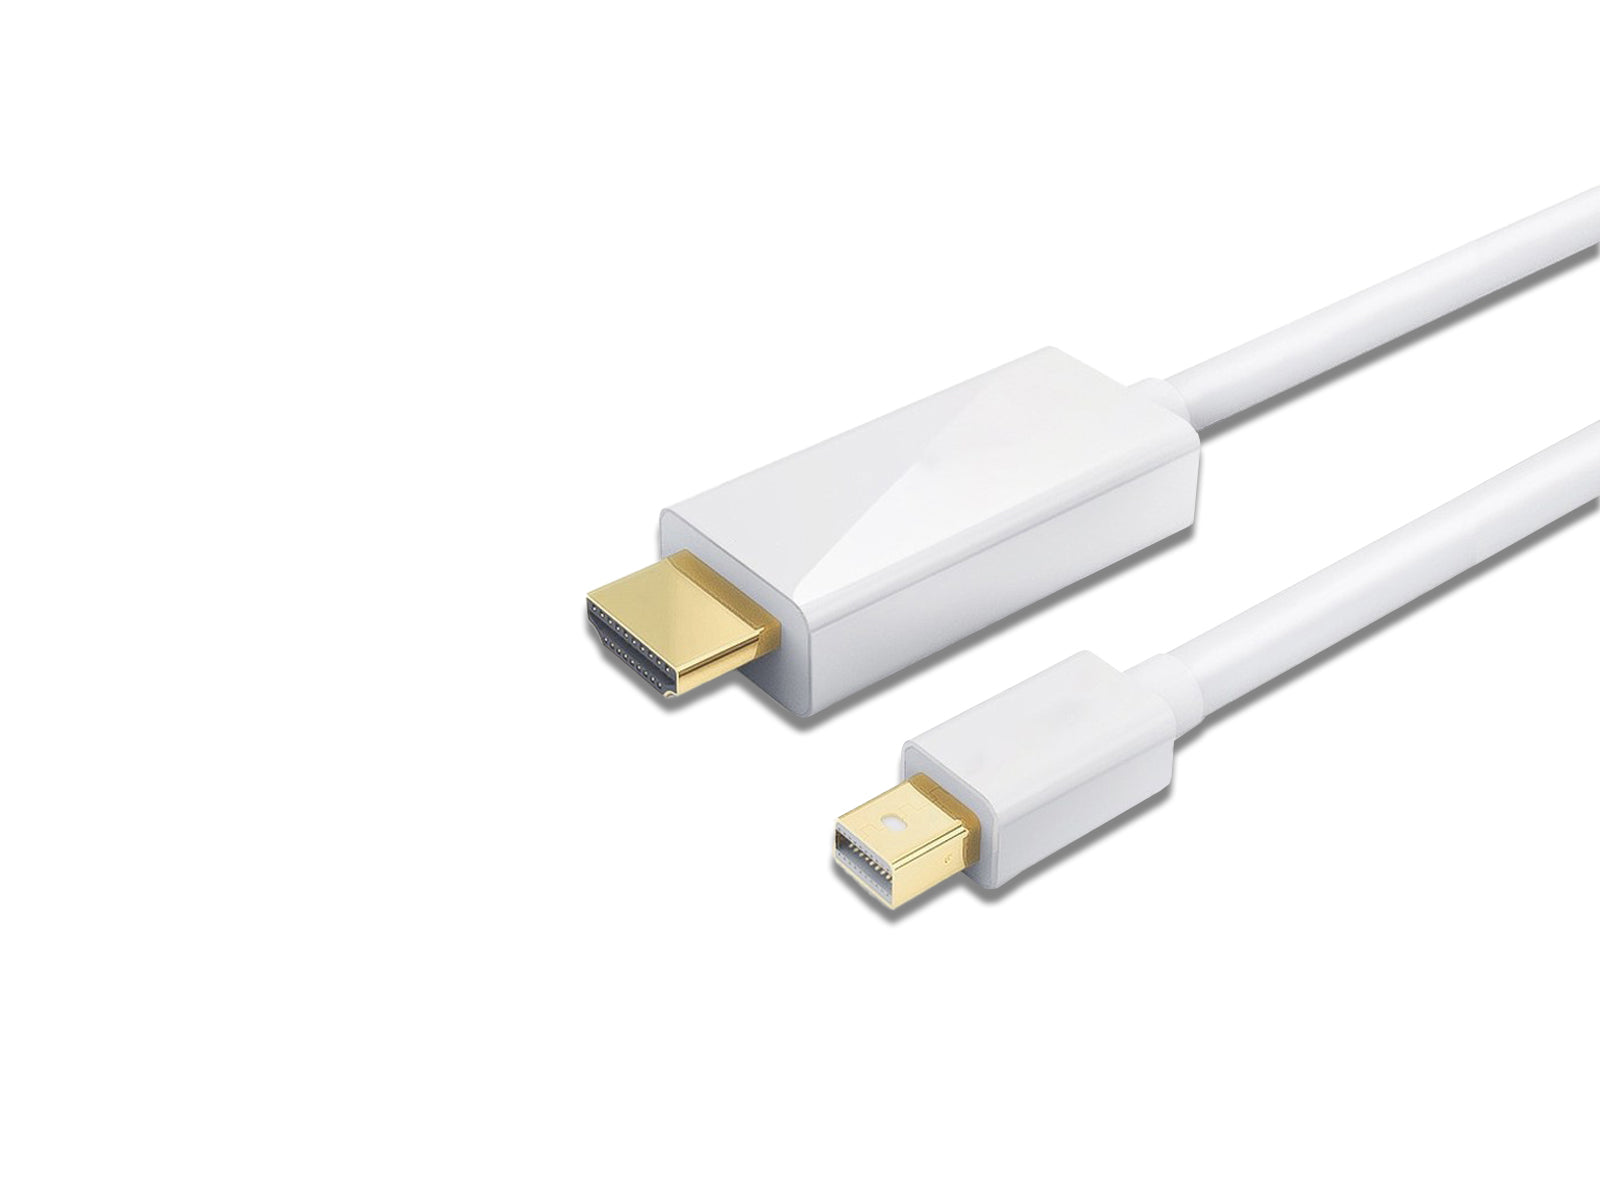 Mini DisplayPort to HDMI Cable Showing Both Cables